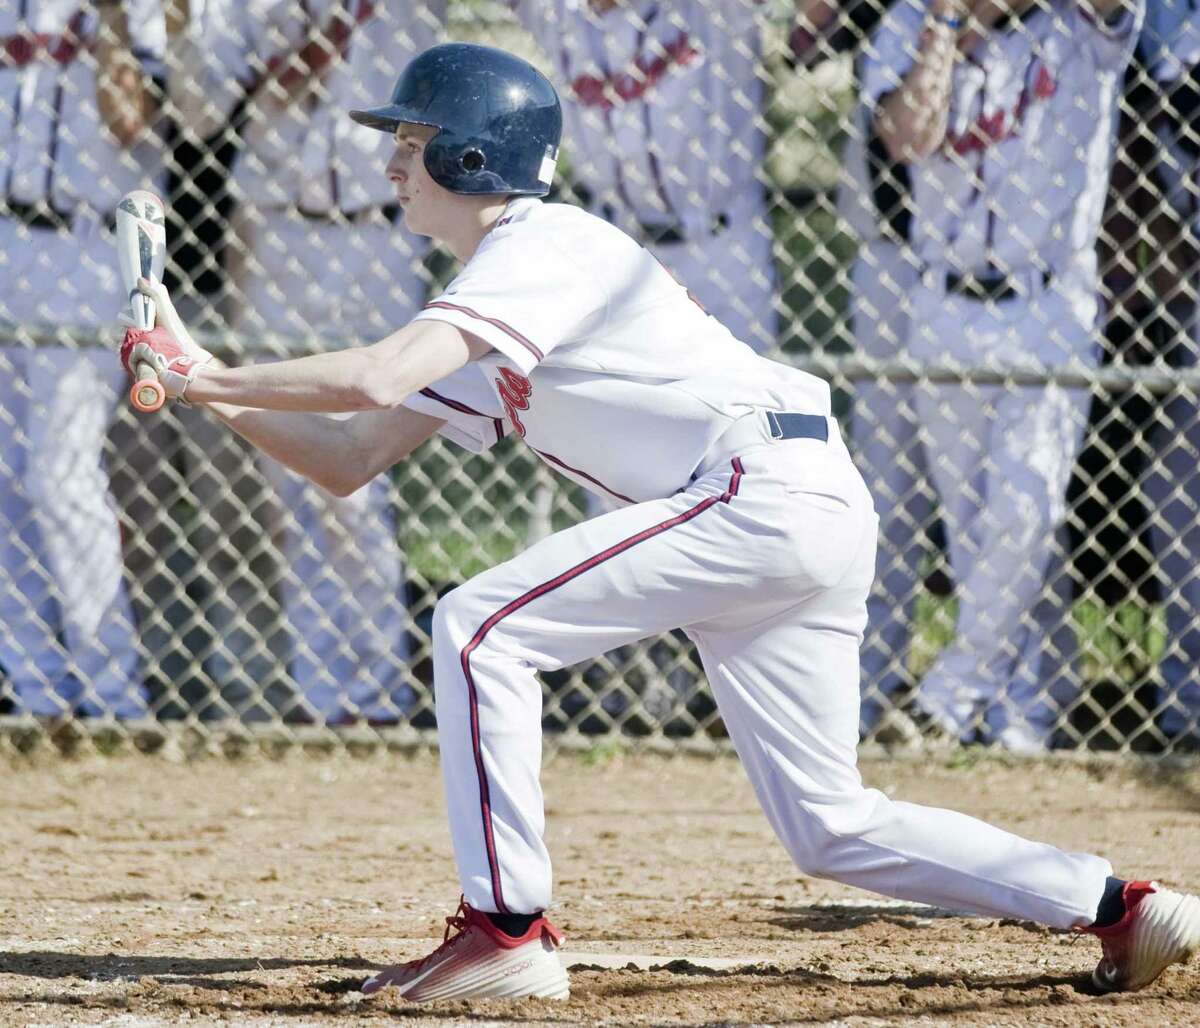 Griffin Root of Brien McMahon High School baseball lays down a bunt vs Staples High School in a game played at McMahon. Wednesday, April 27, 2016